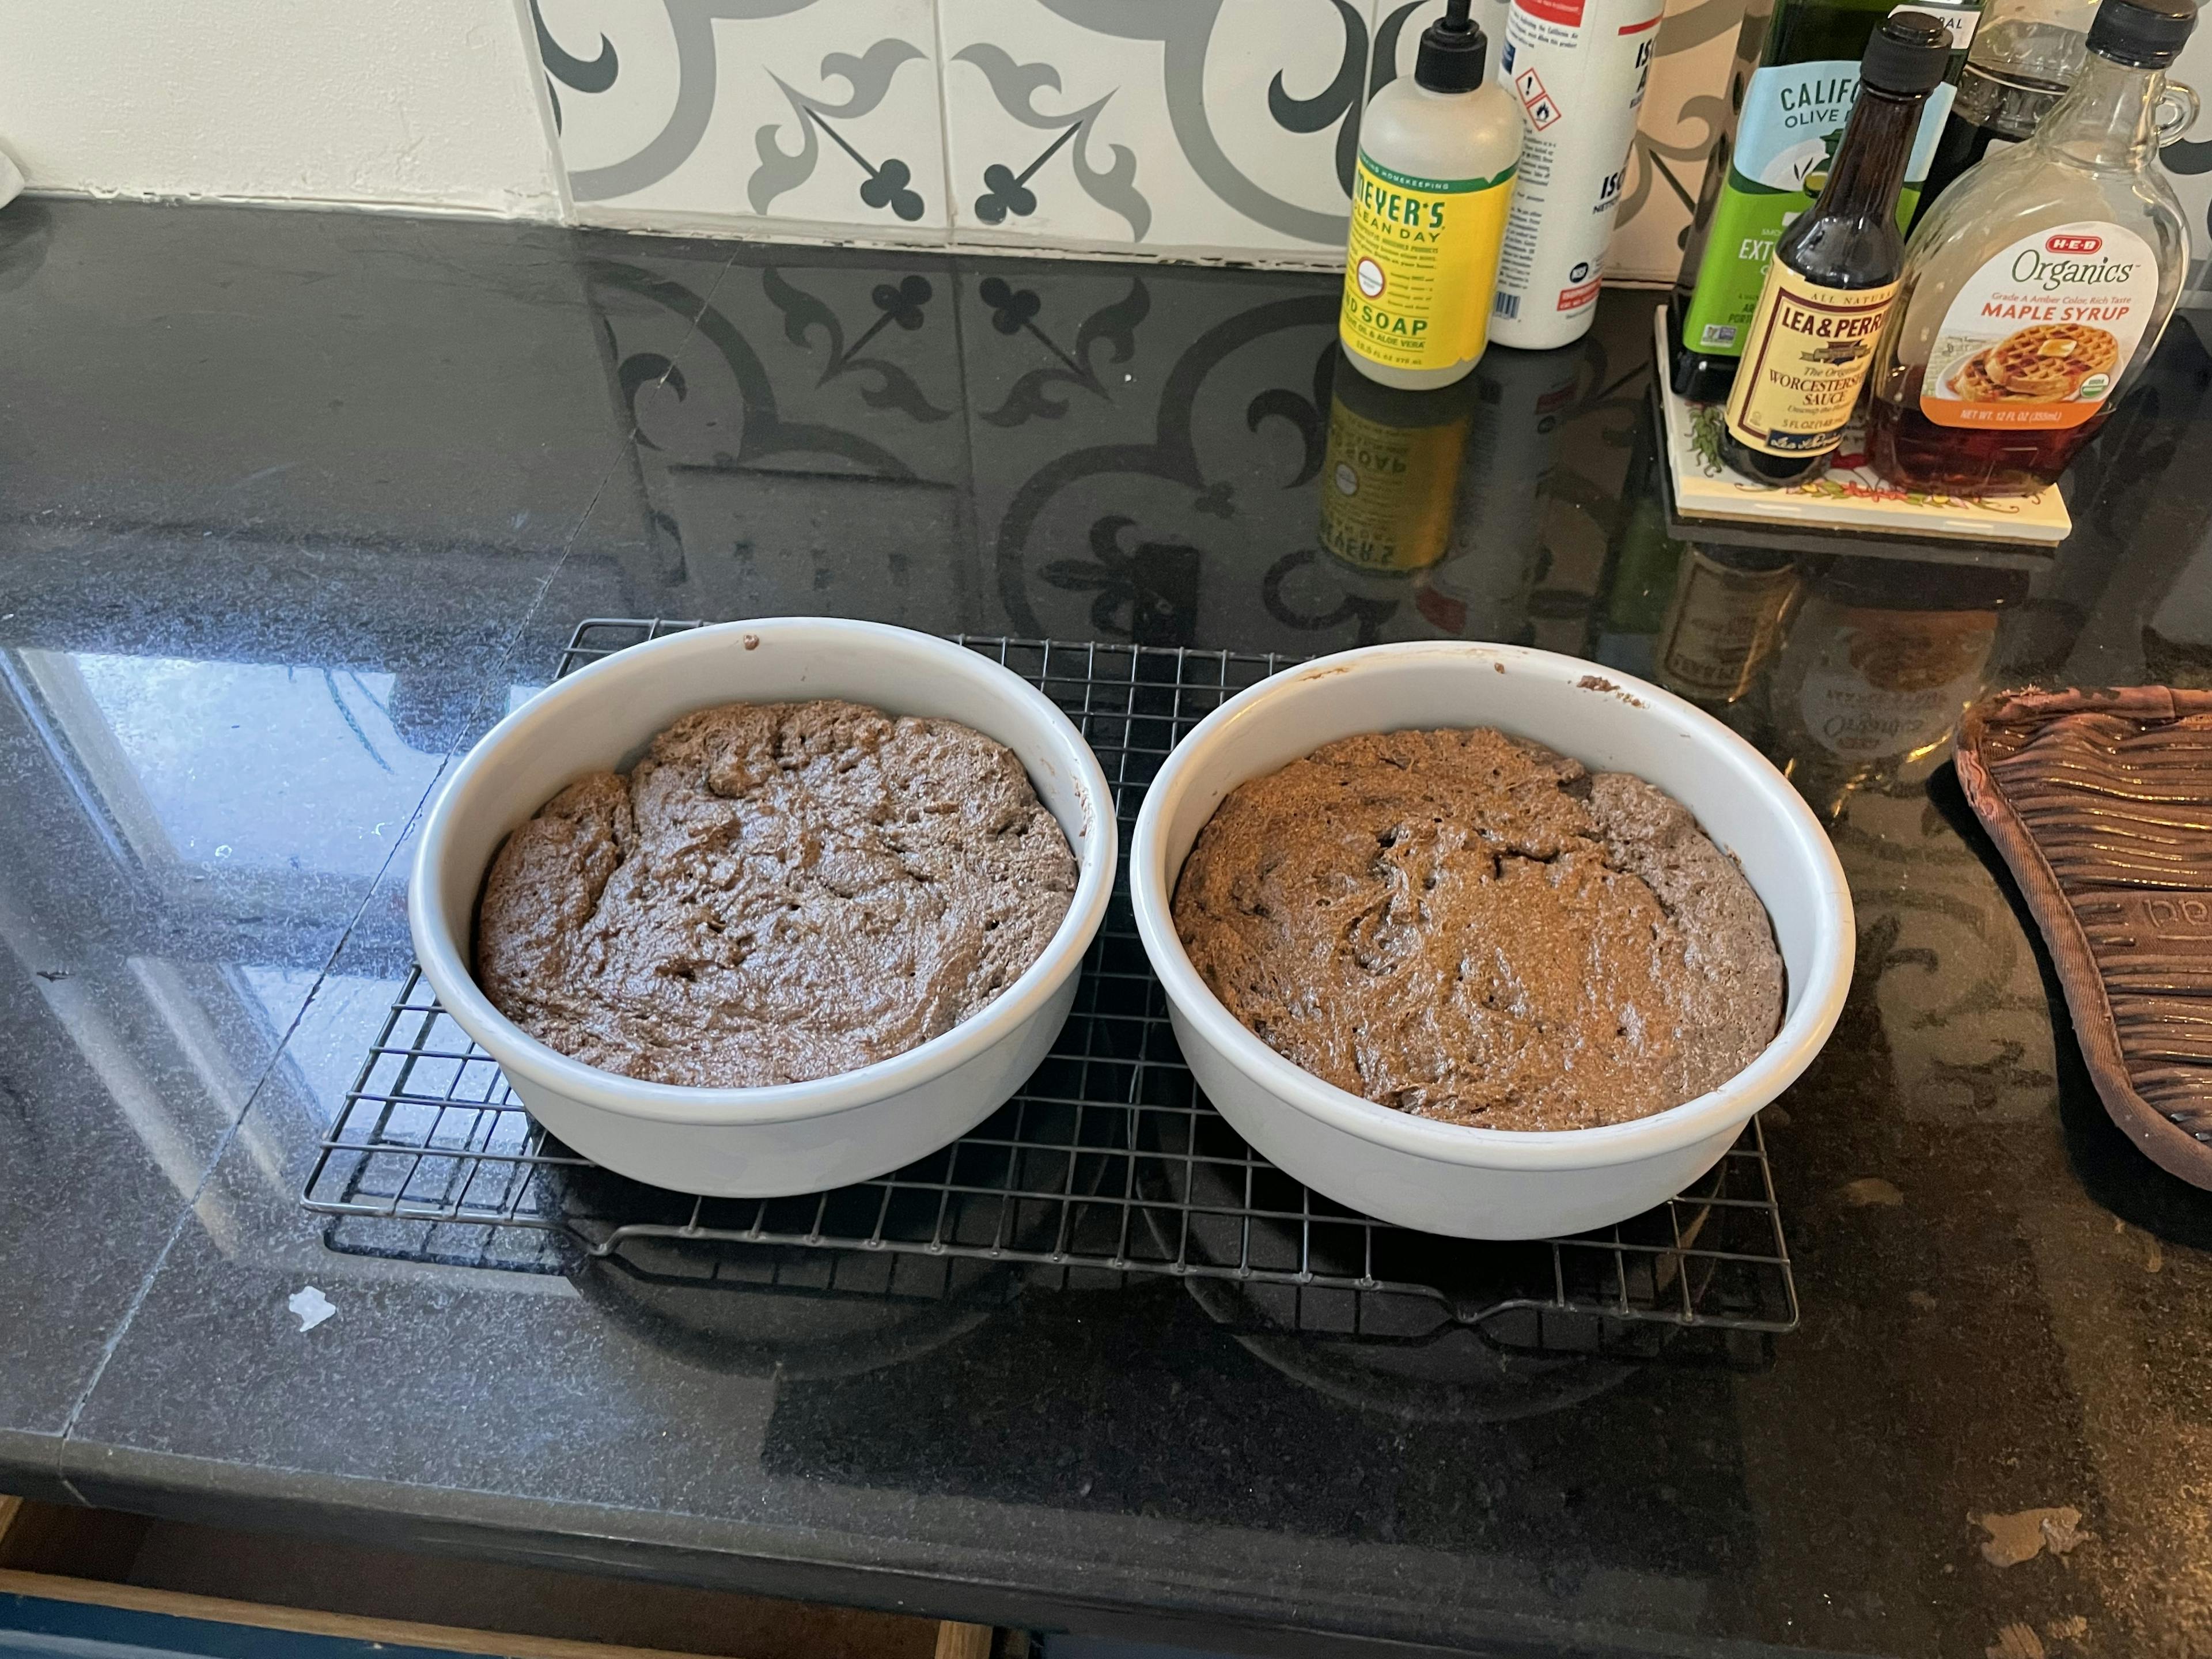 Two chocolate cakes- as tasty as next and Drupal 